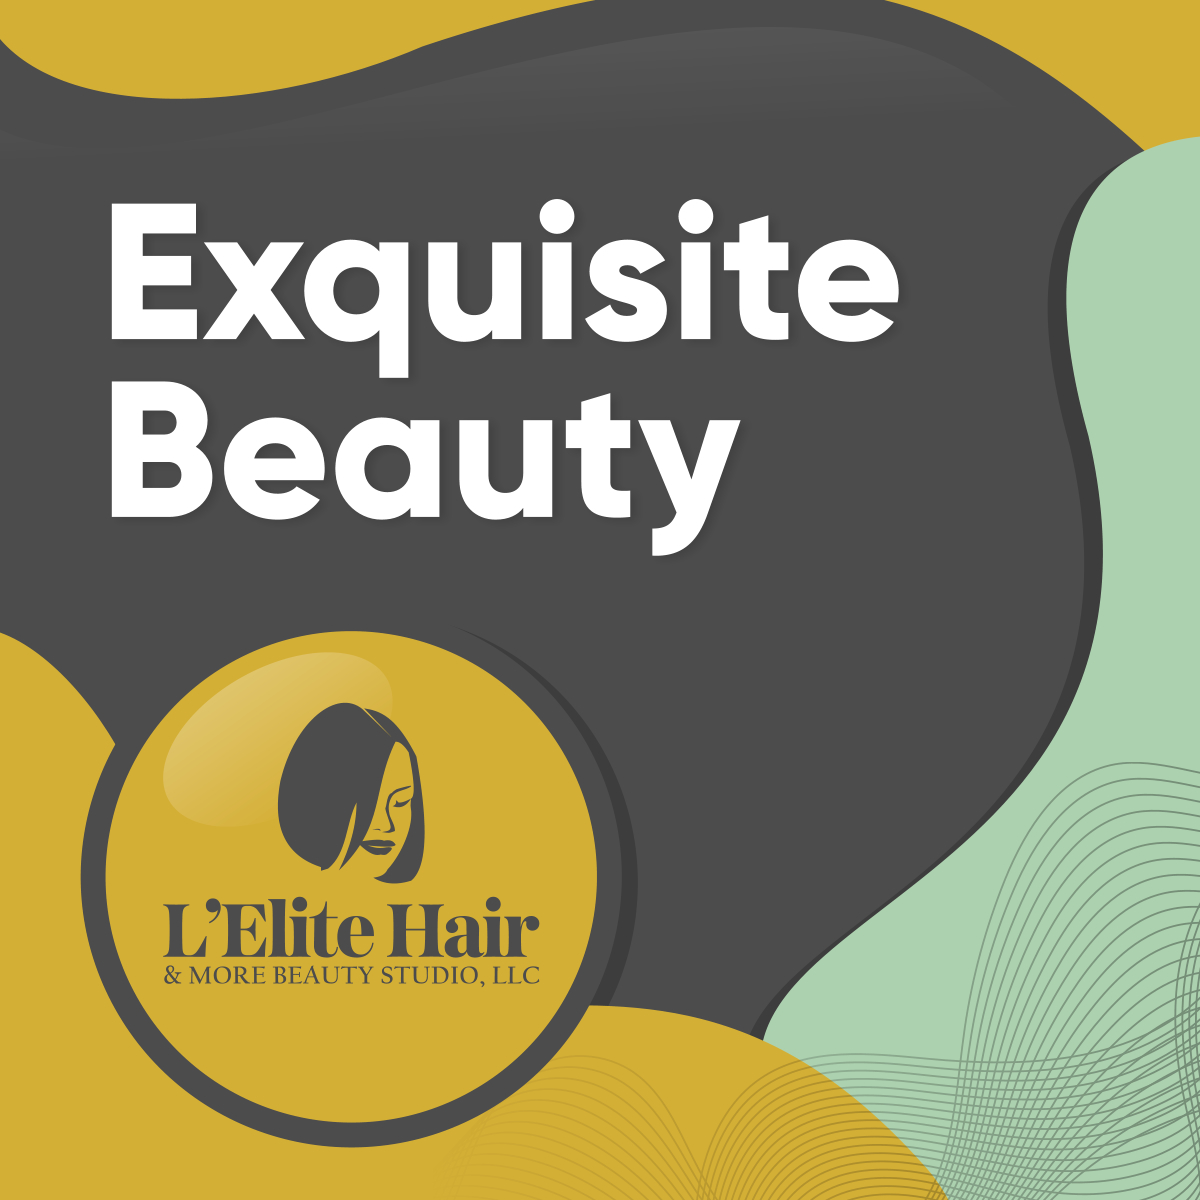 Experience exquisite beauty at L'Elite Hair & More Beauty Studio. Discover our exceptional services and indulge in a world of luxury and transformation. Contact us today!

#BonitaSpringsFL #SalonServices #ExquisiteBeauty